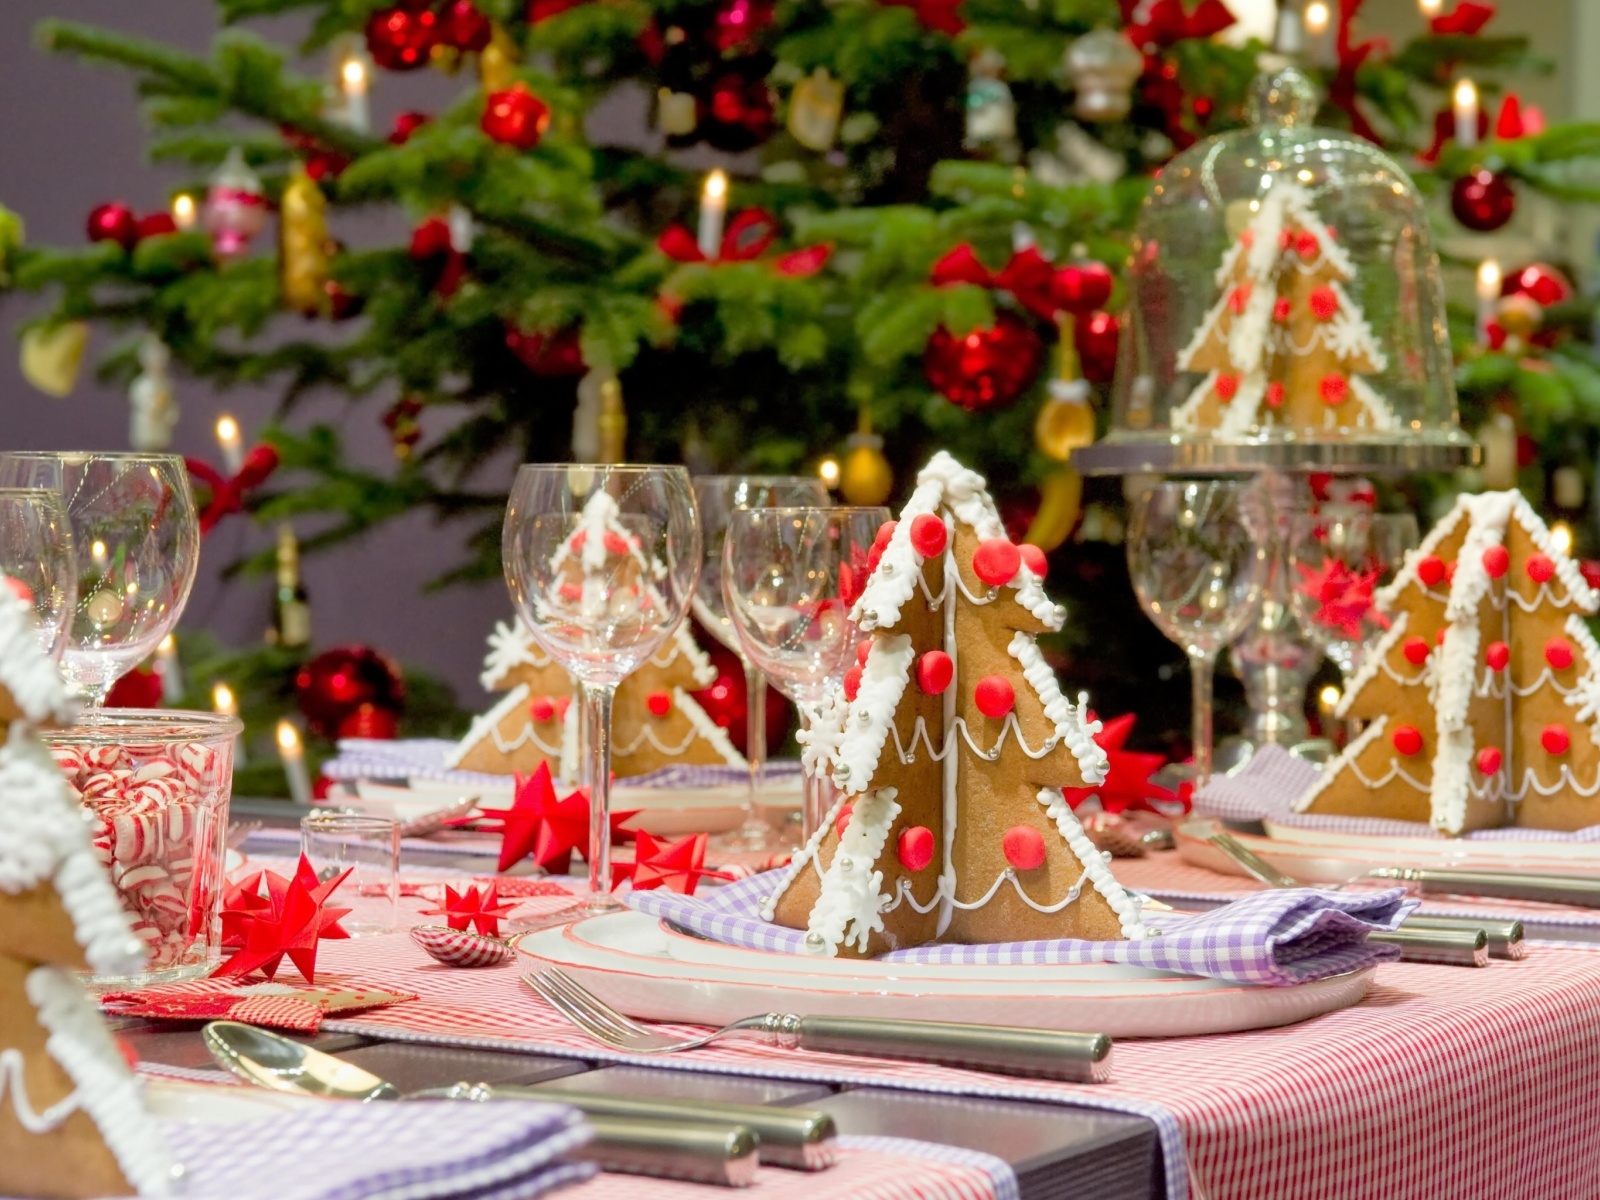 Christmas Table Decorations Ideas wallpaper 1600x1200